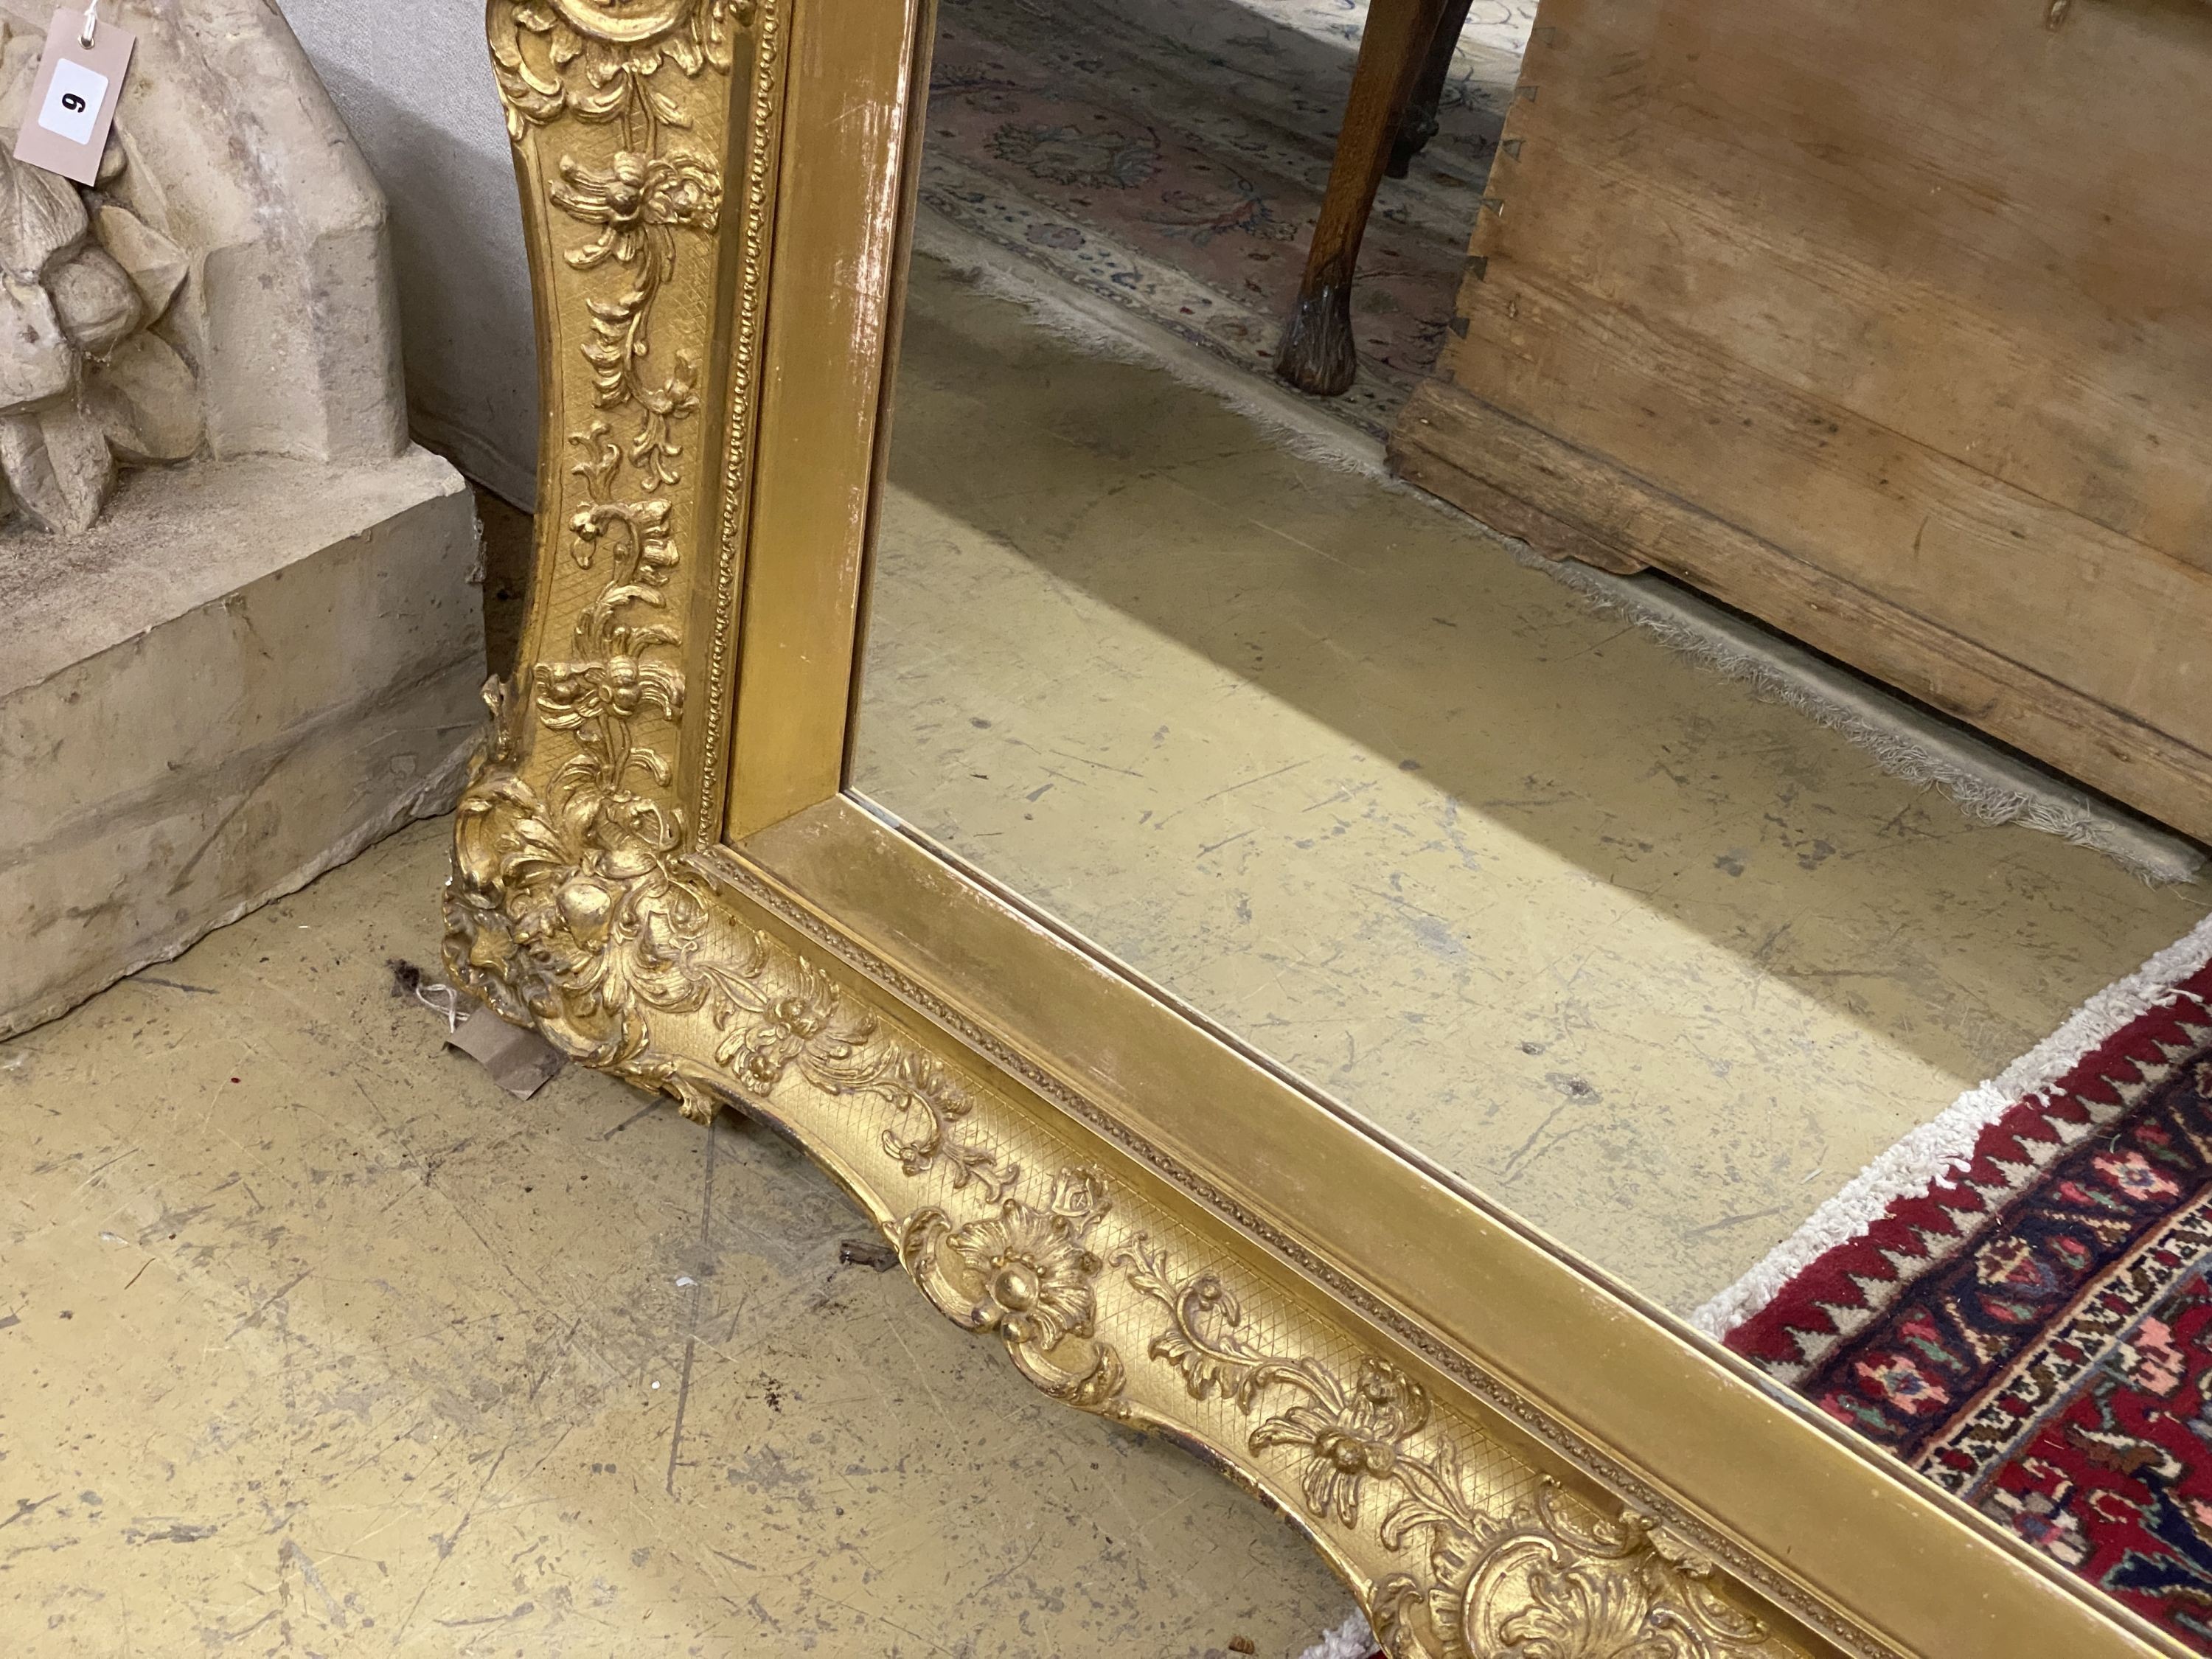 A Victorian giltwood and gesso rectangular wall mirror, width 124cm, height 106cm